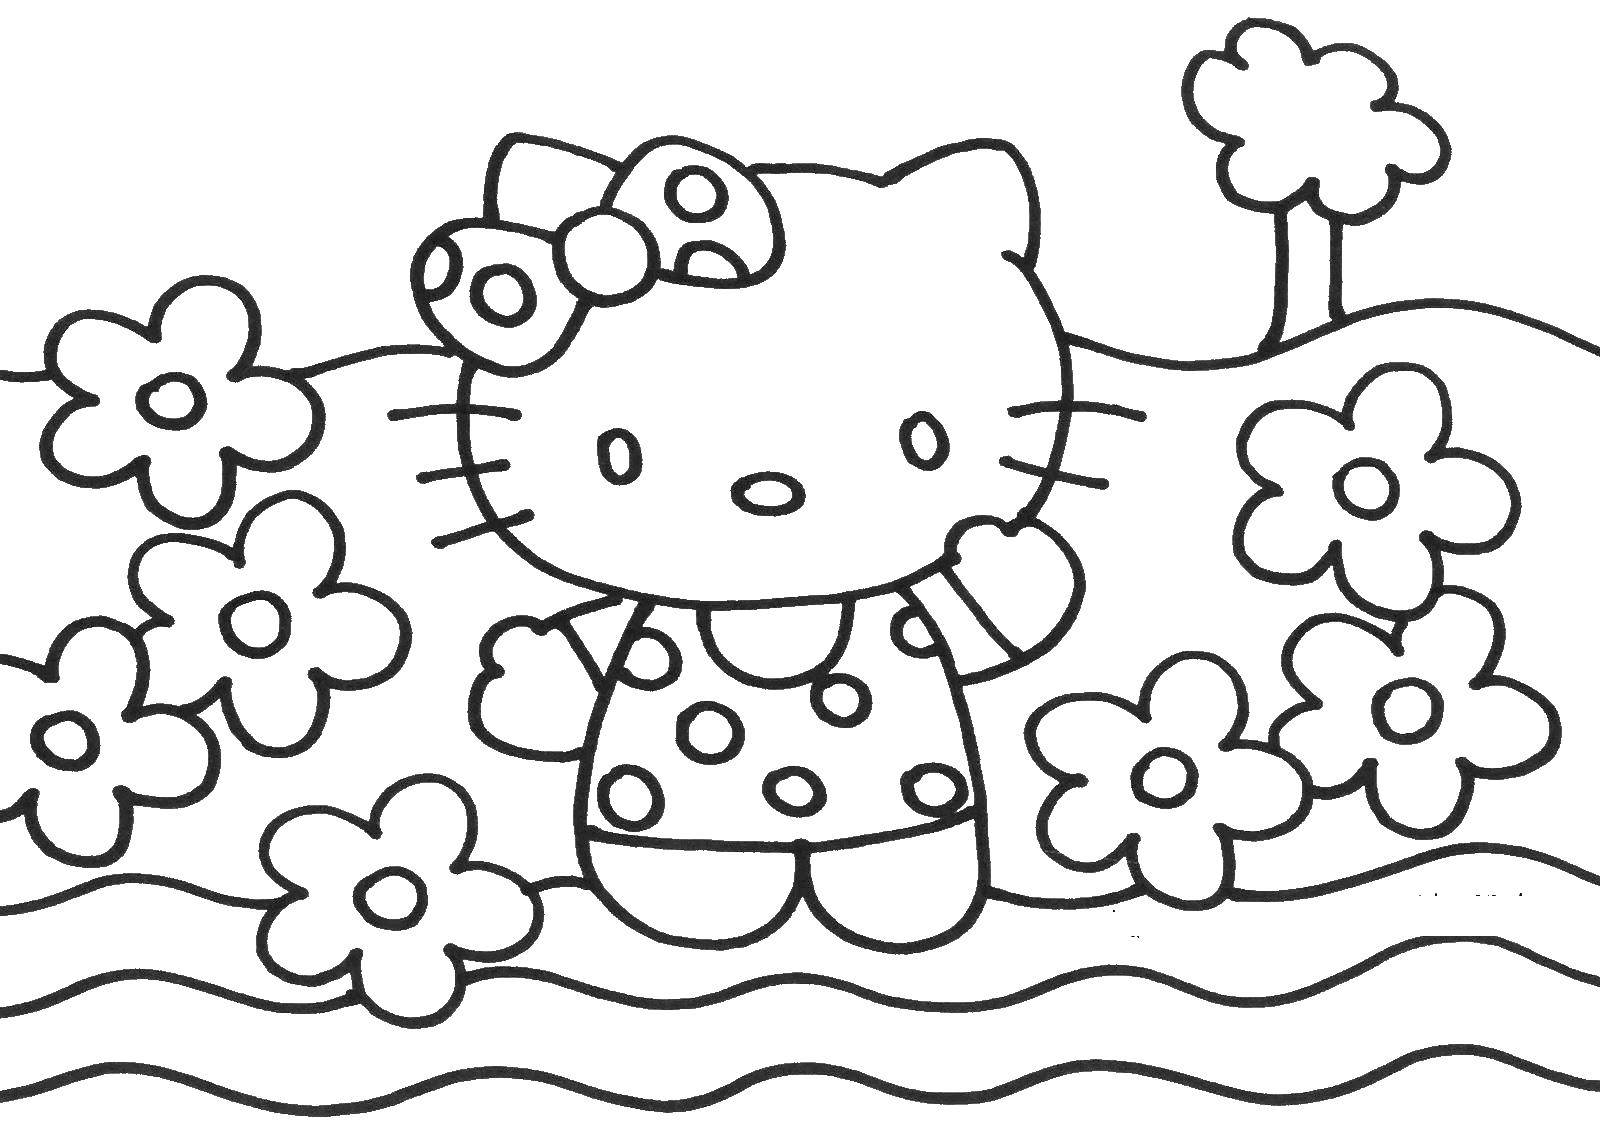 Coloring Hello kitty. Category Hello Kitty. Tags:  Hello kitty, flowers.